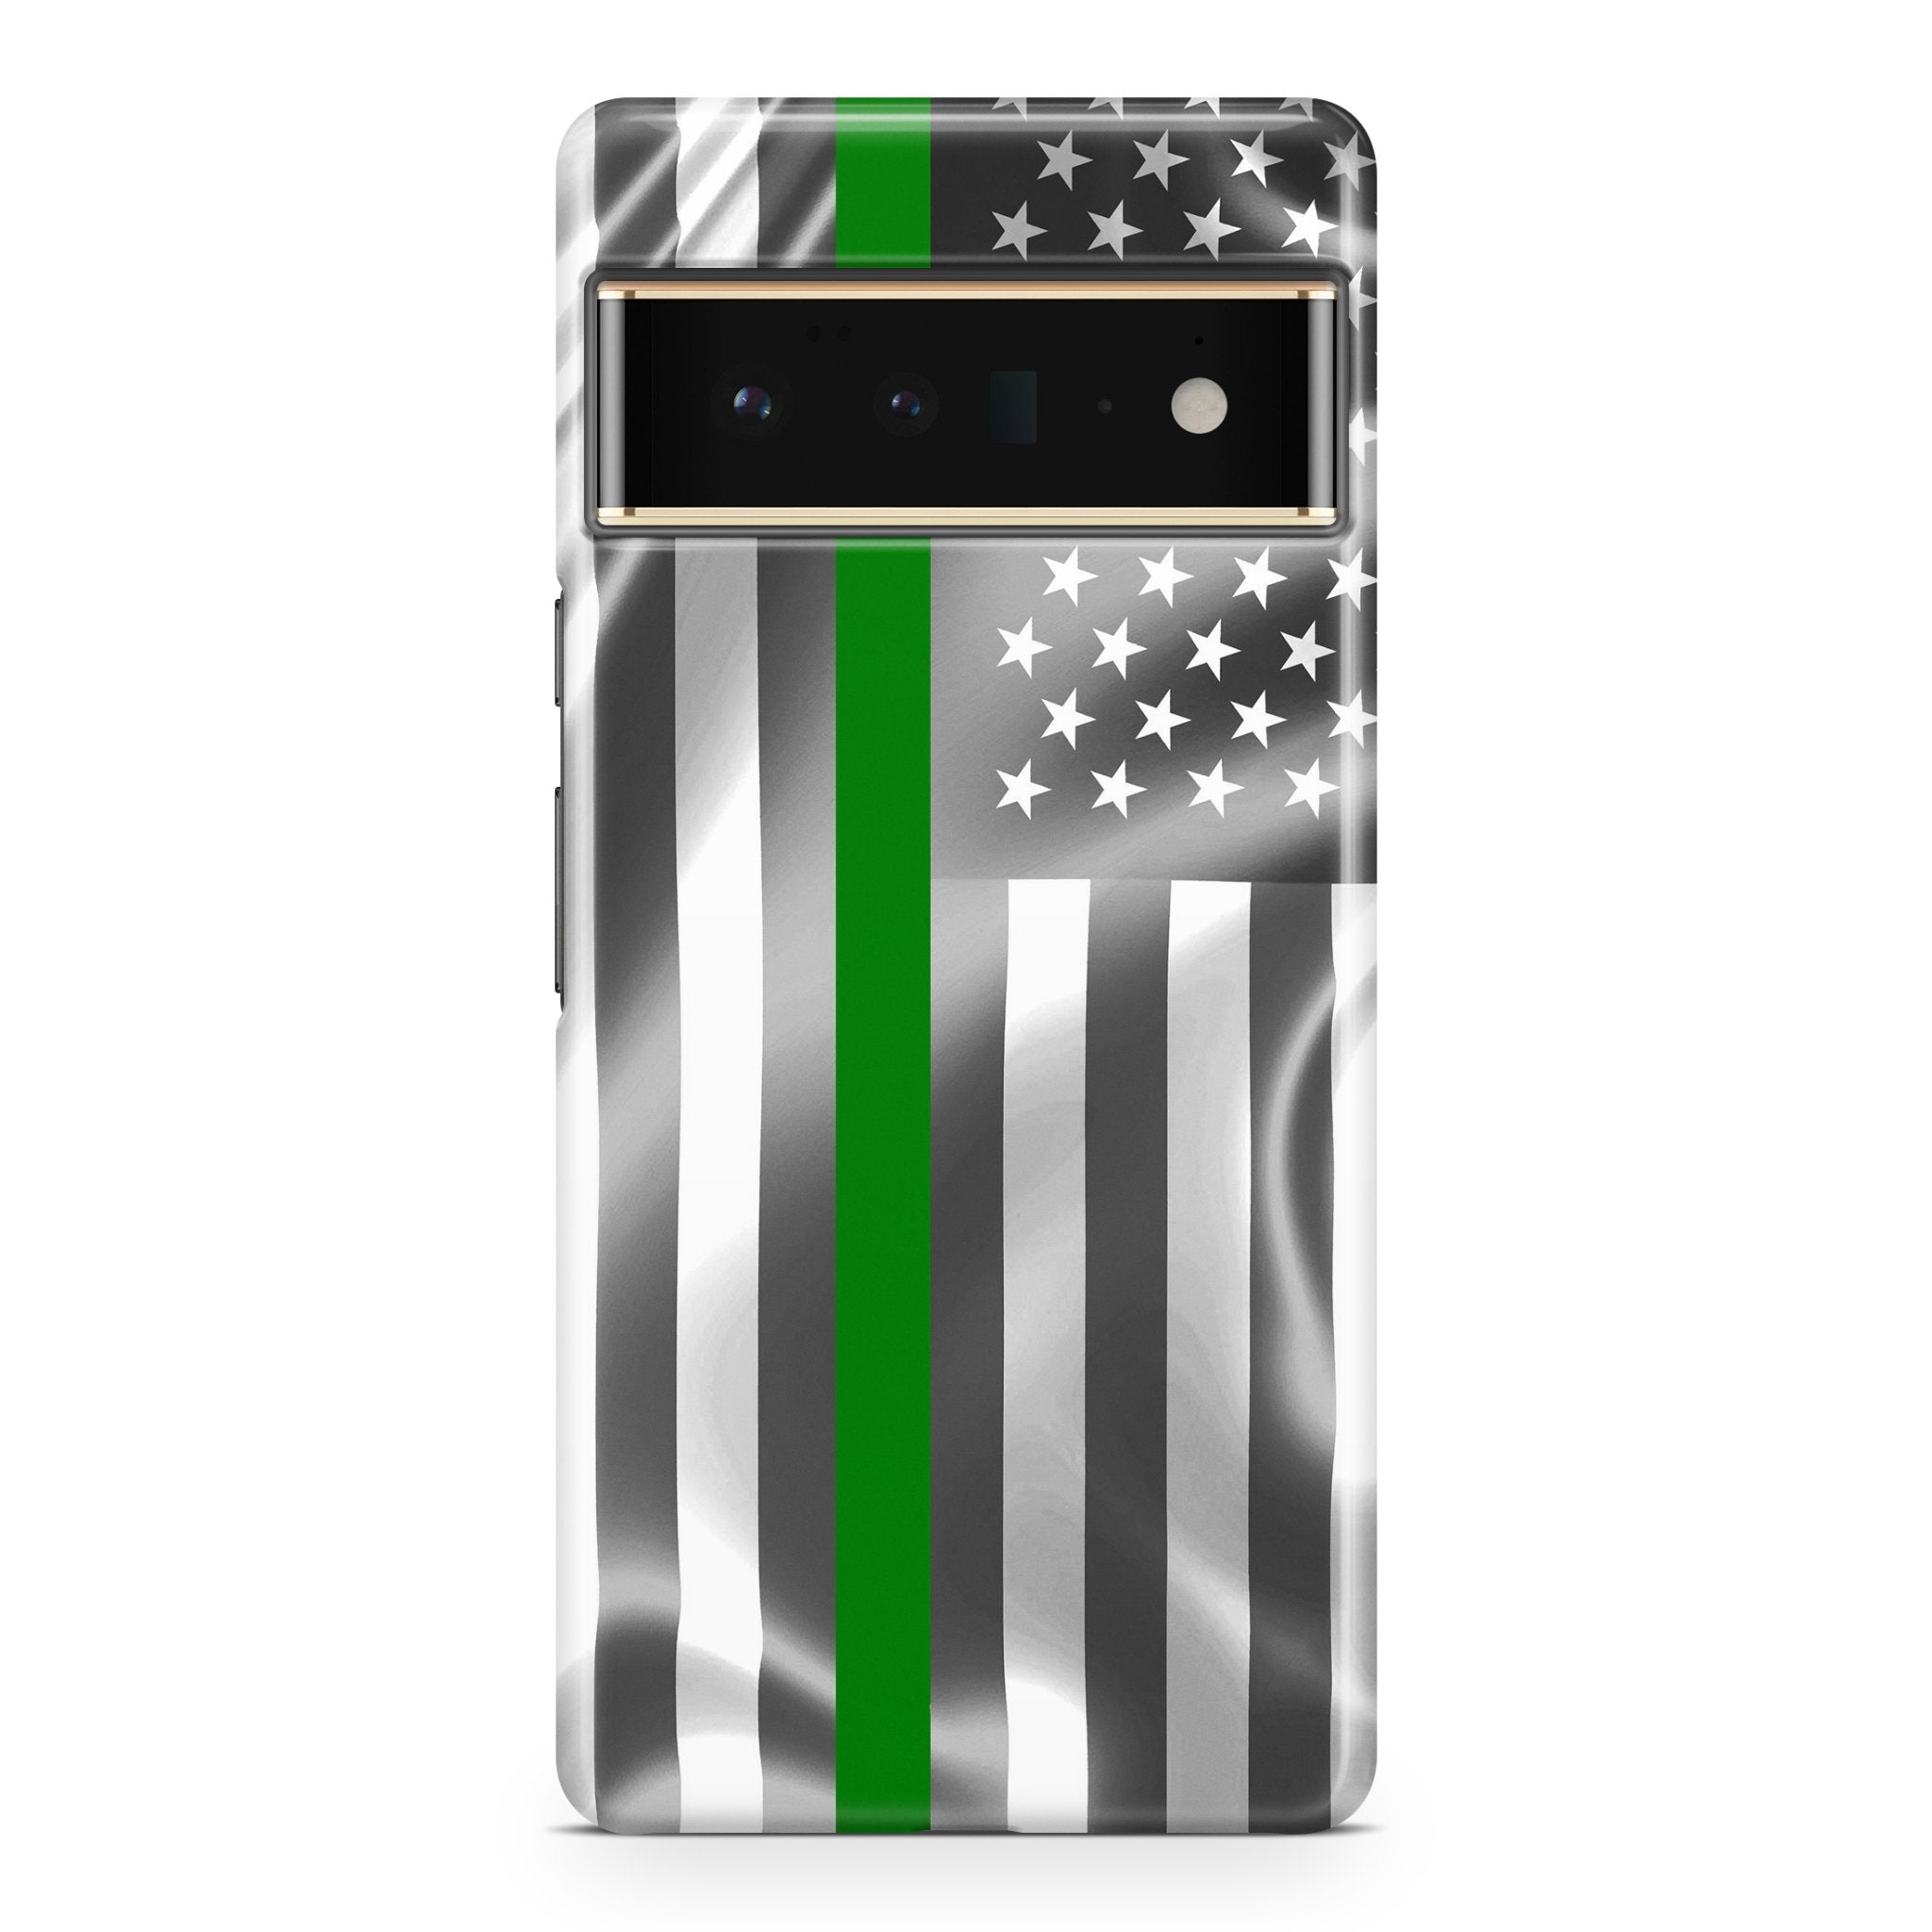 Thin Green Line - Google phone case designs by CaseSwagger